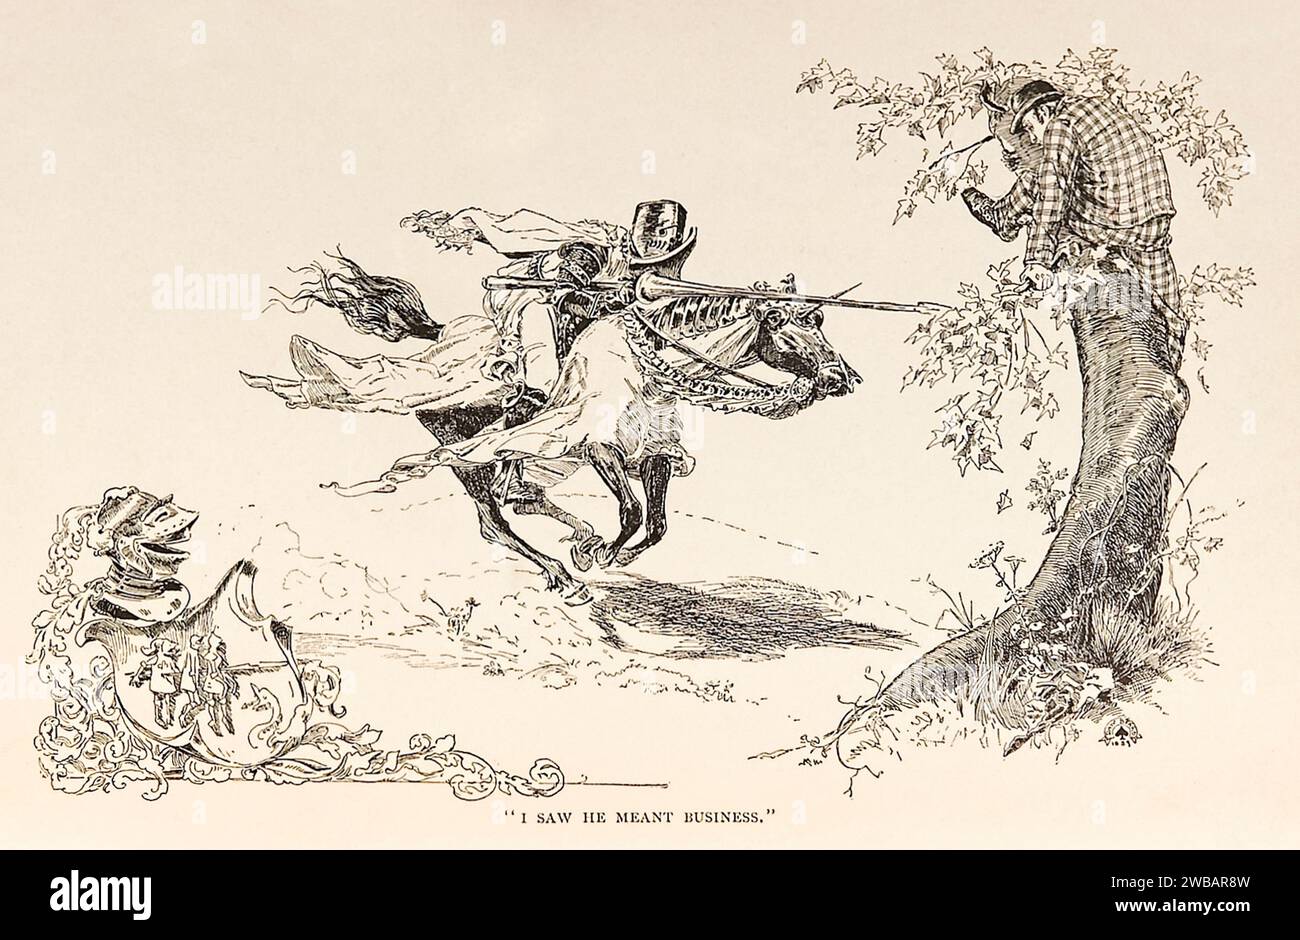 'I saw he meant business’ frontispiece illustration from ‘A Connecticut Yankee in King Arthur's Court’ by Mark Twain (1835-1910), artwork by Daniel Carter Beard (1850-1941). Photograph from an 1889 first edition. Credit: Private Collection / AF Fotografie Stock Photo